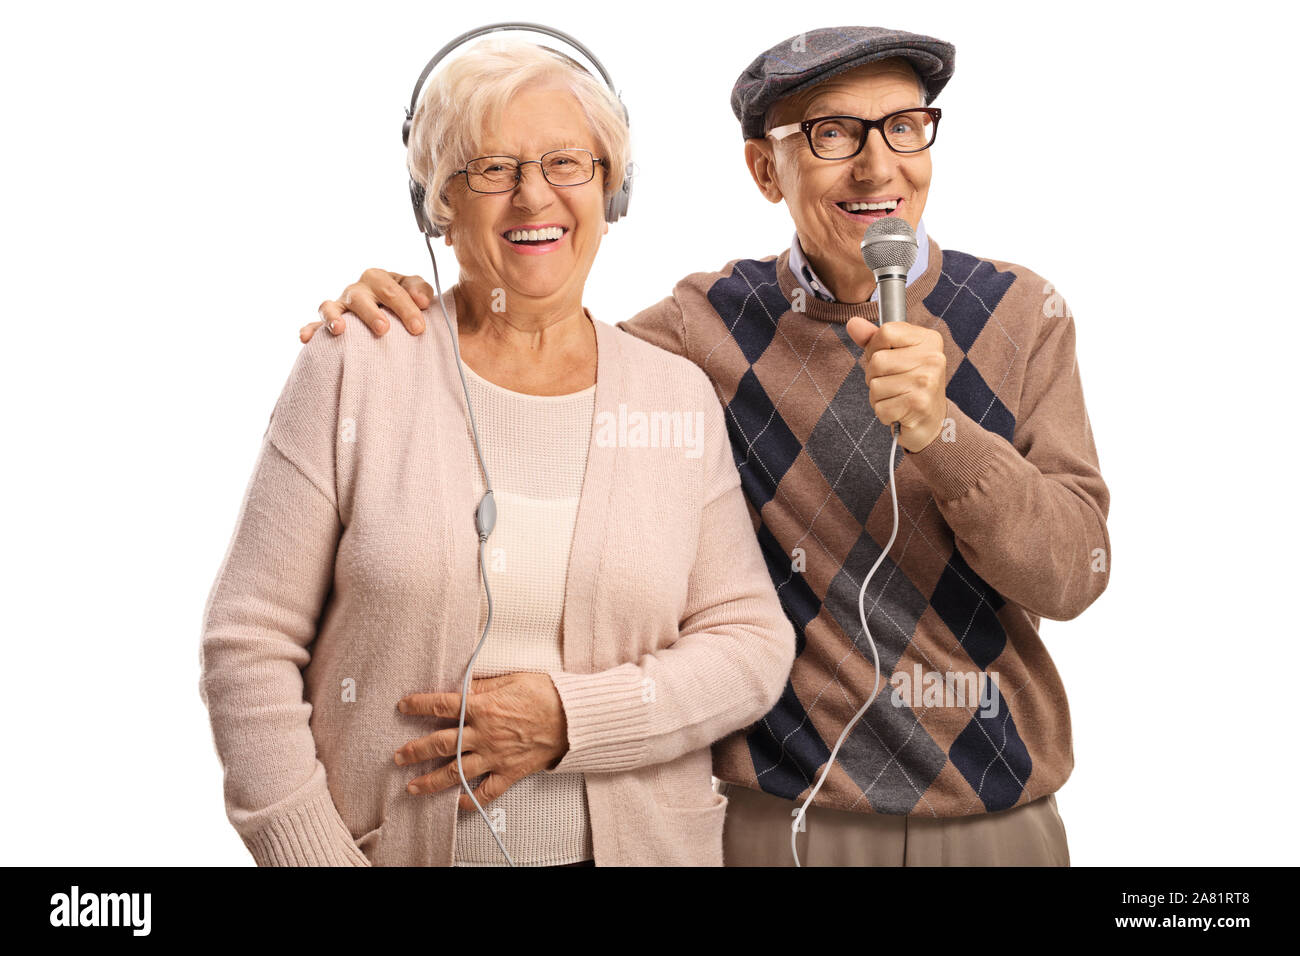 Elderly woman with headpones and an elderly man with a microphone isolated on white background Stock Photo